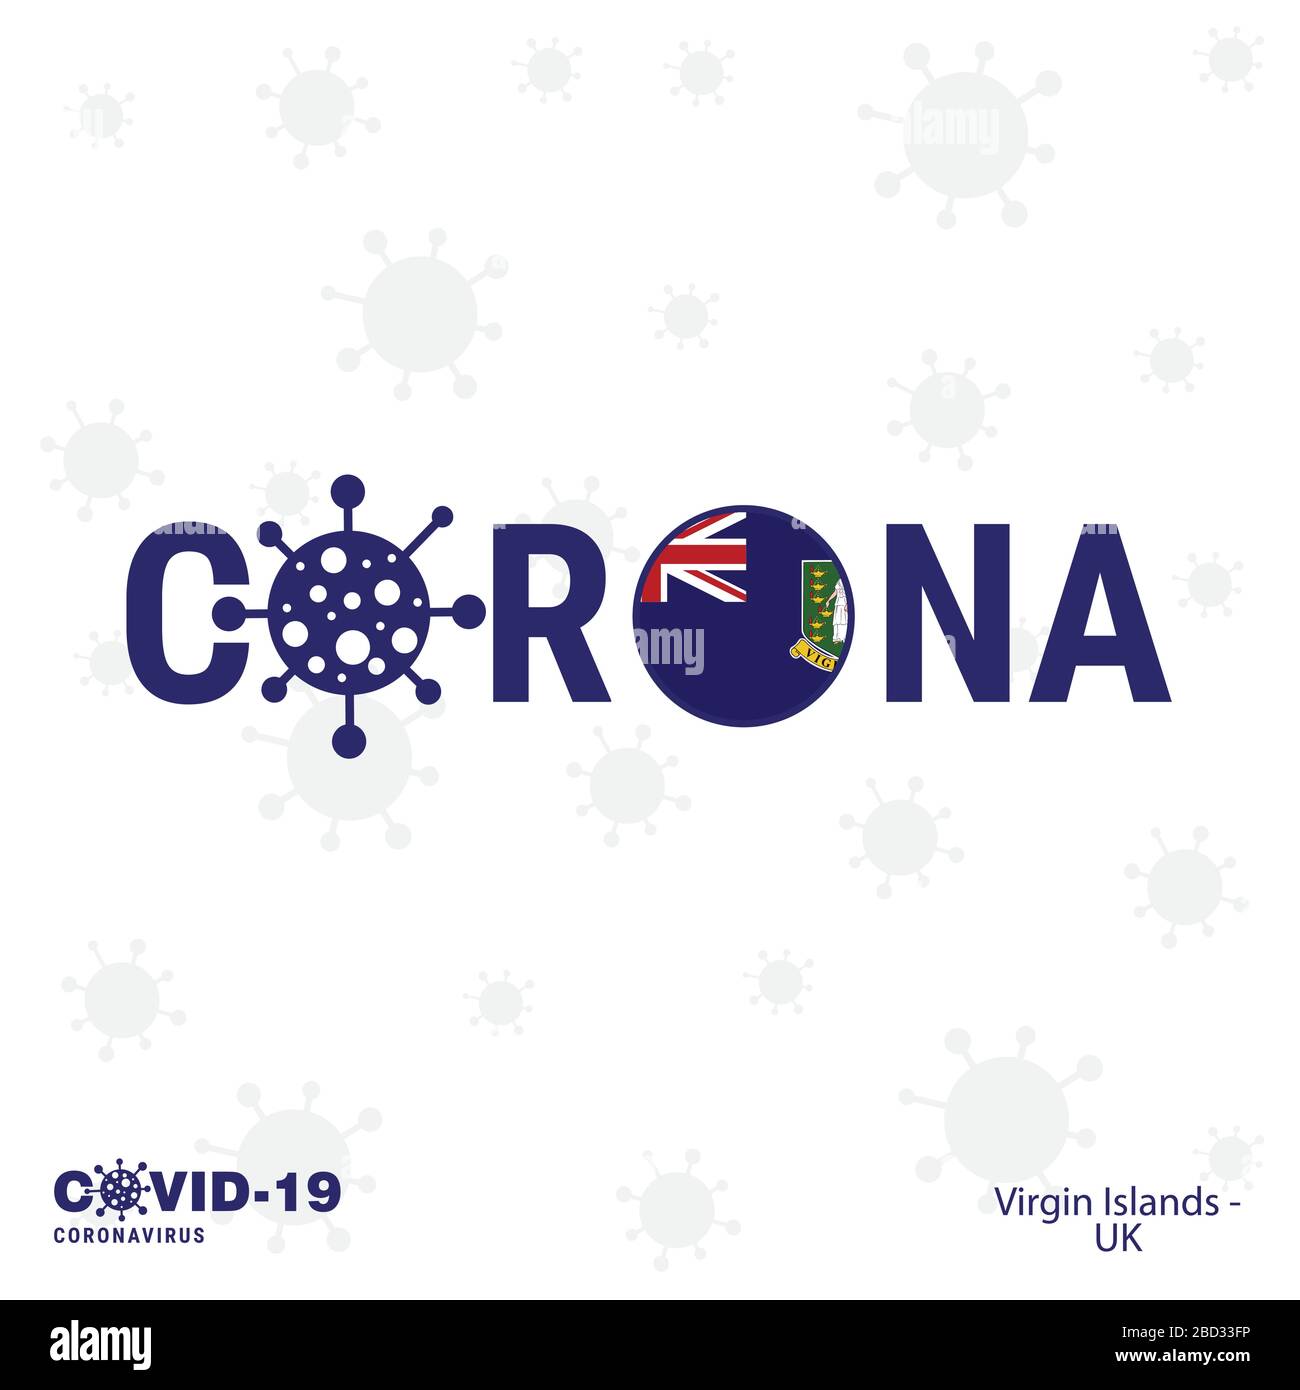 Virgin Islands UK Coronavirus Typography. COVID-19 country banner. Stay home, Stay Healthy. Take care of your own health Stock Vector